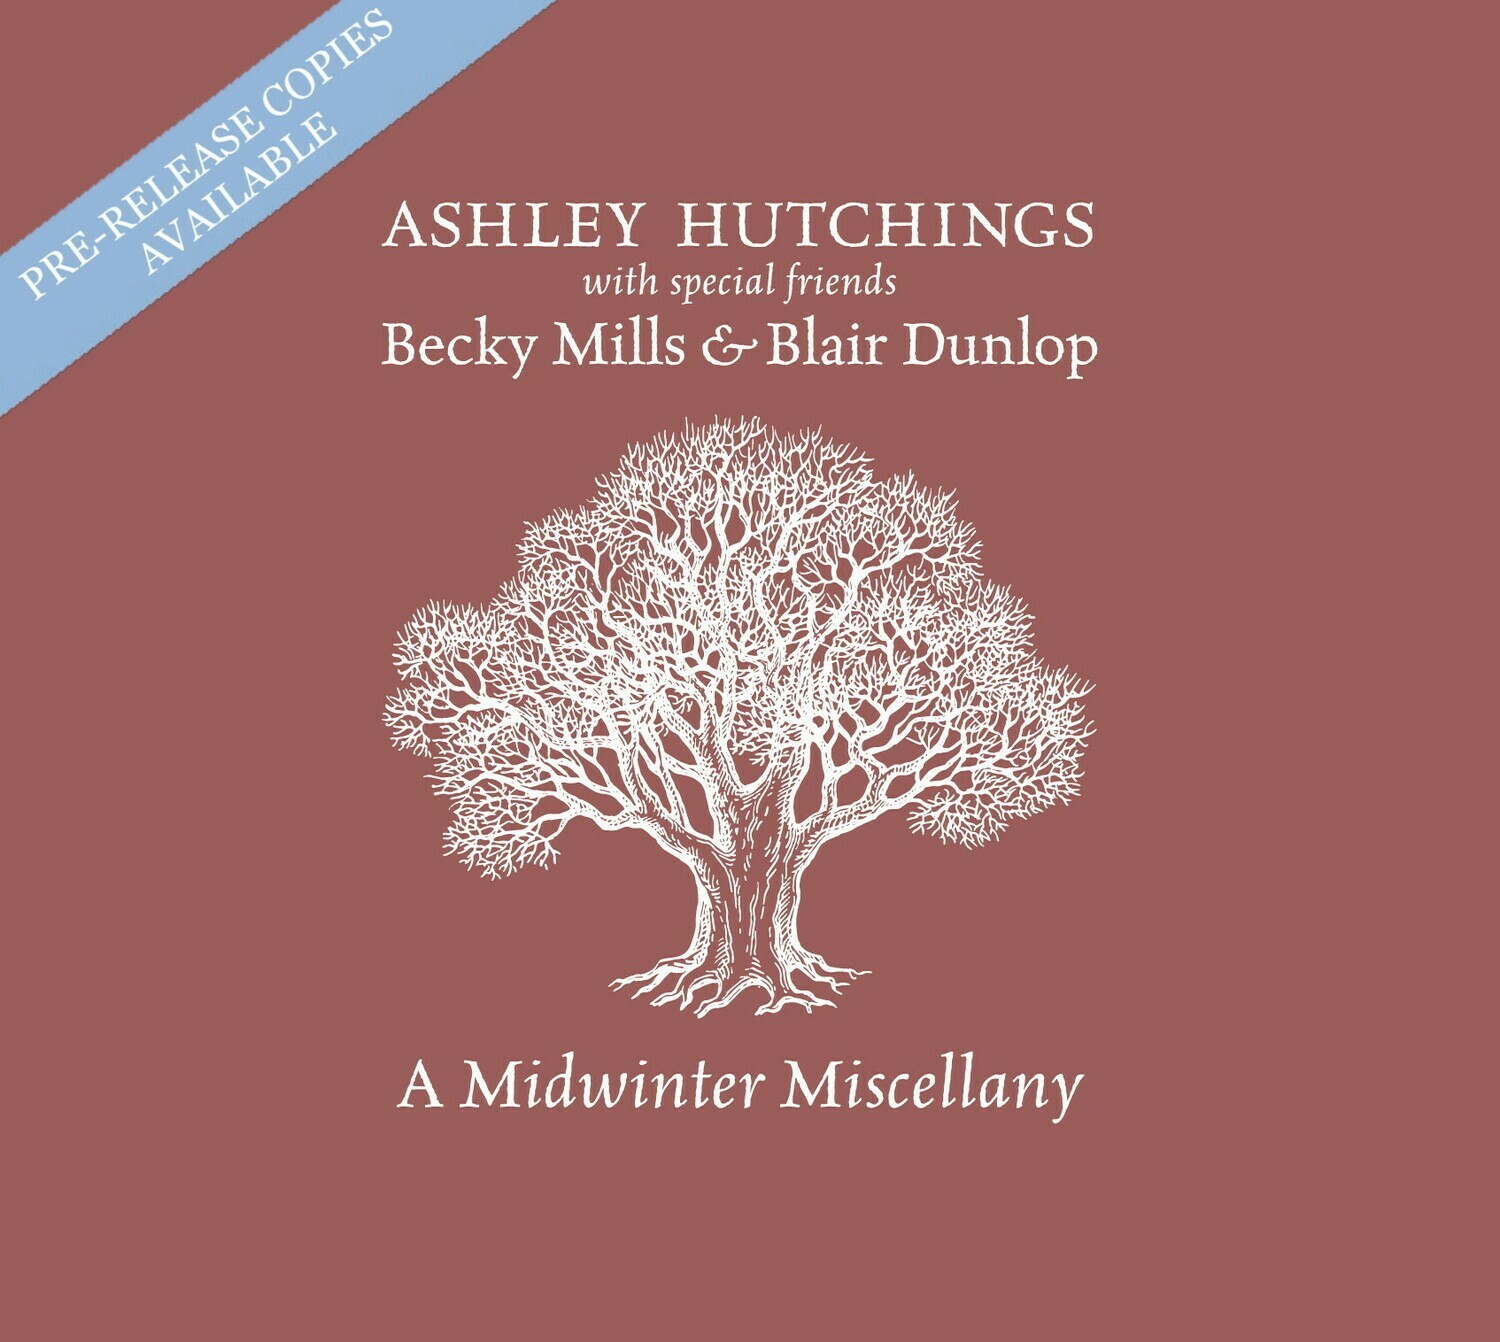 Ashley Hutchings with special friends Becky Mills & Blair Dunlop : "A Midwinter Miscellany" (CD) (2020)